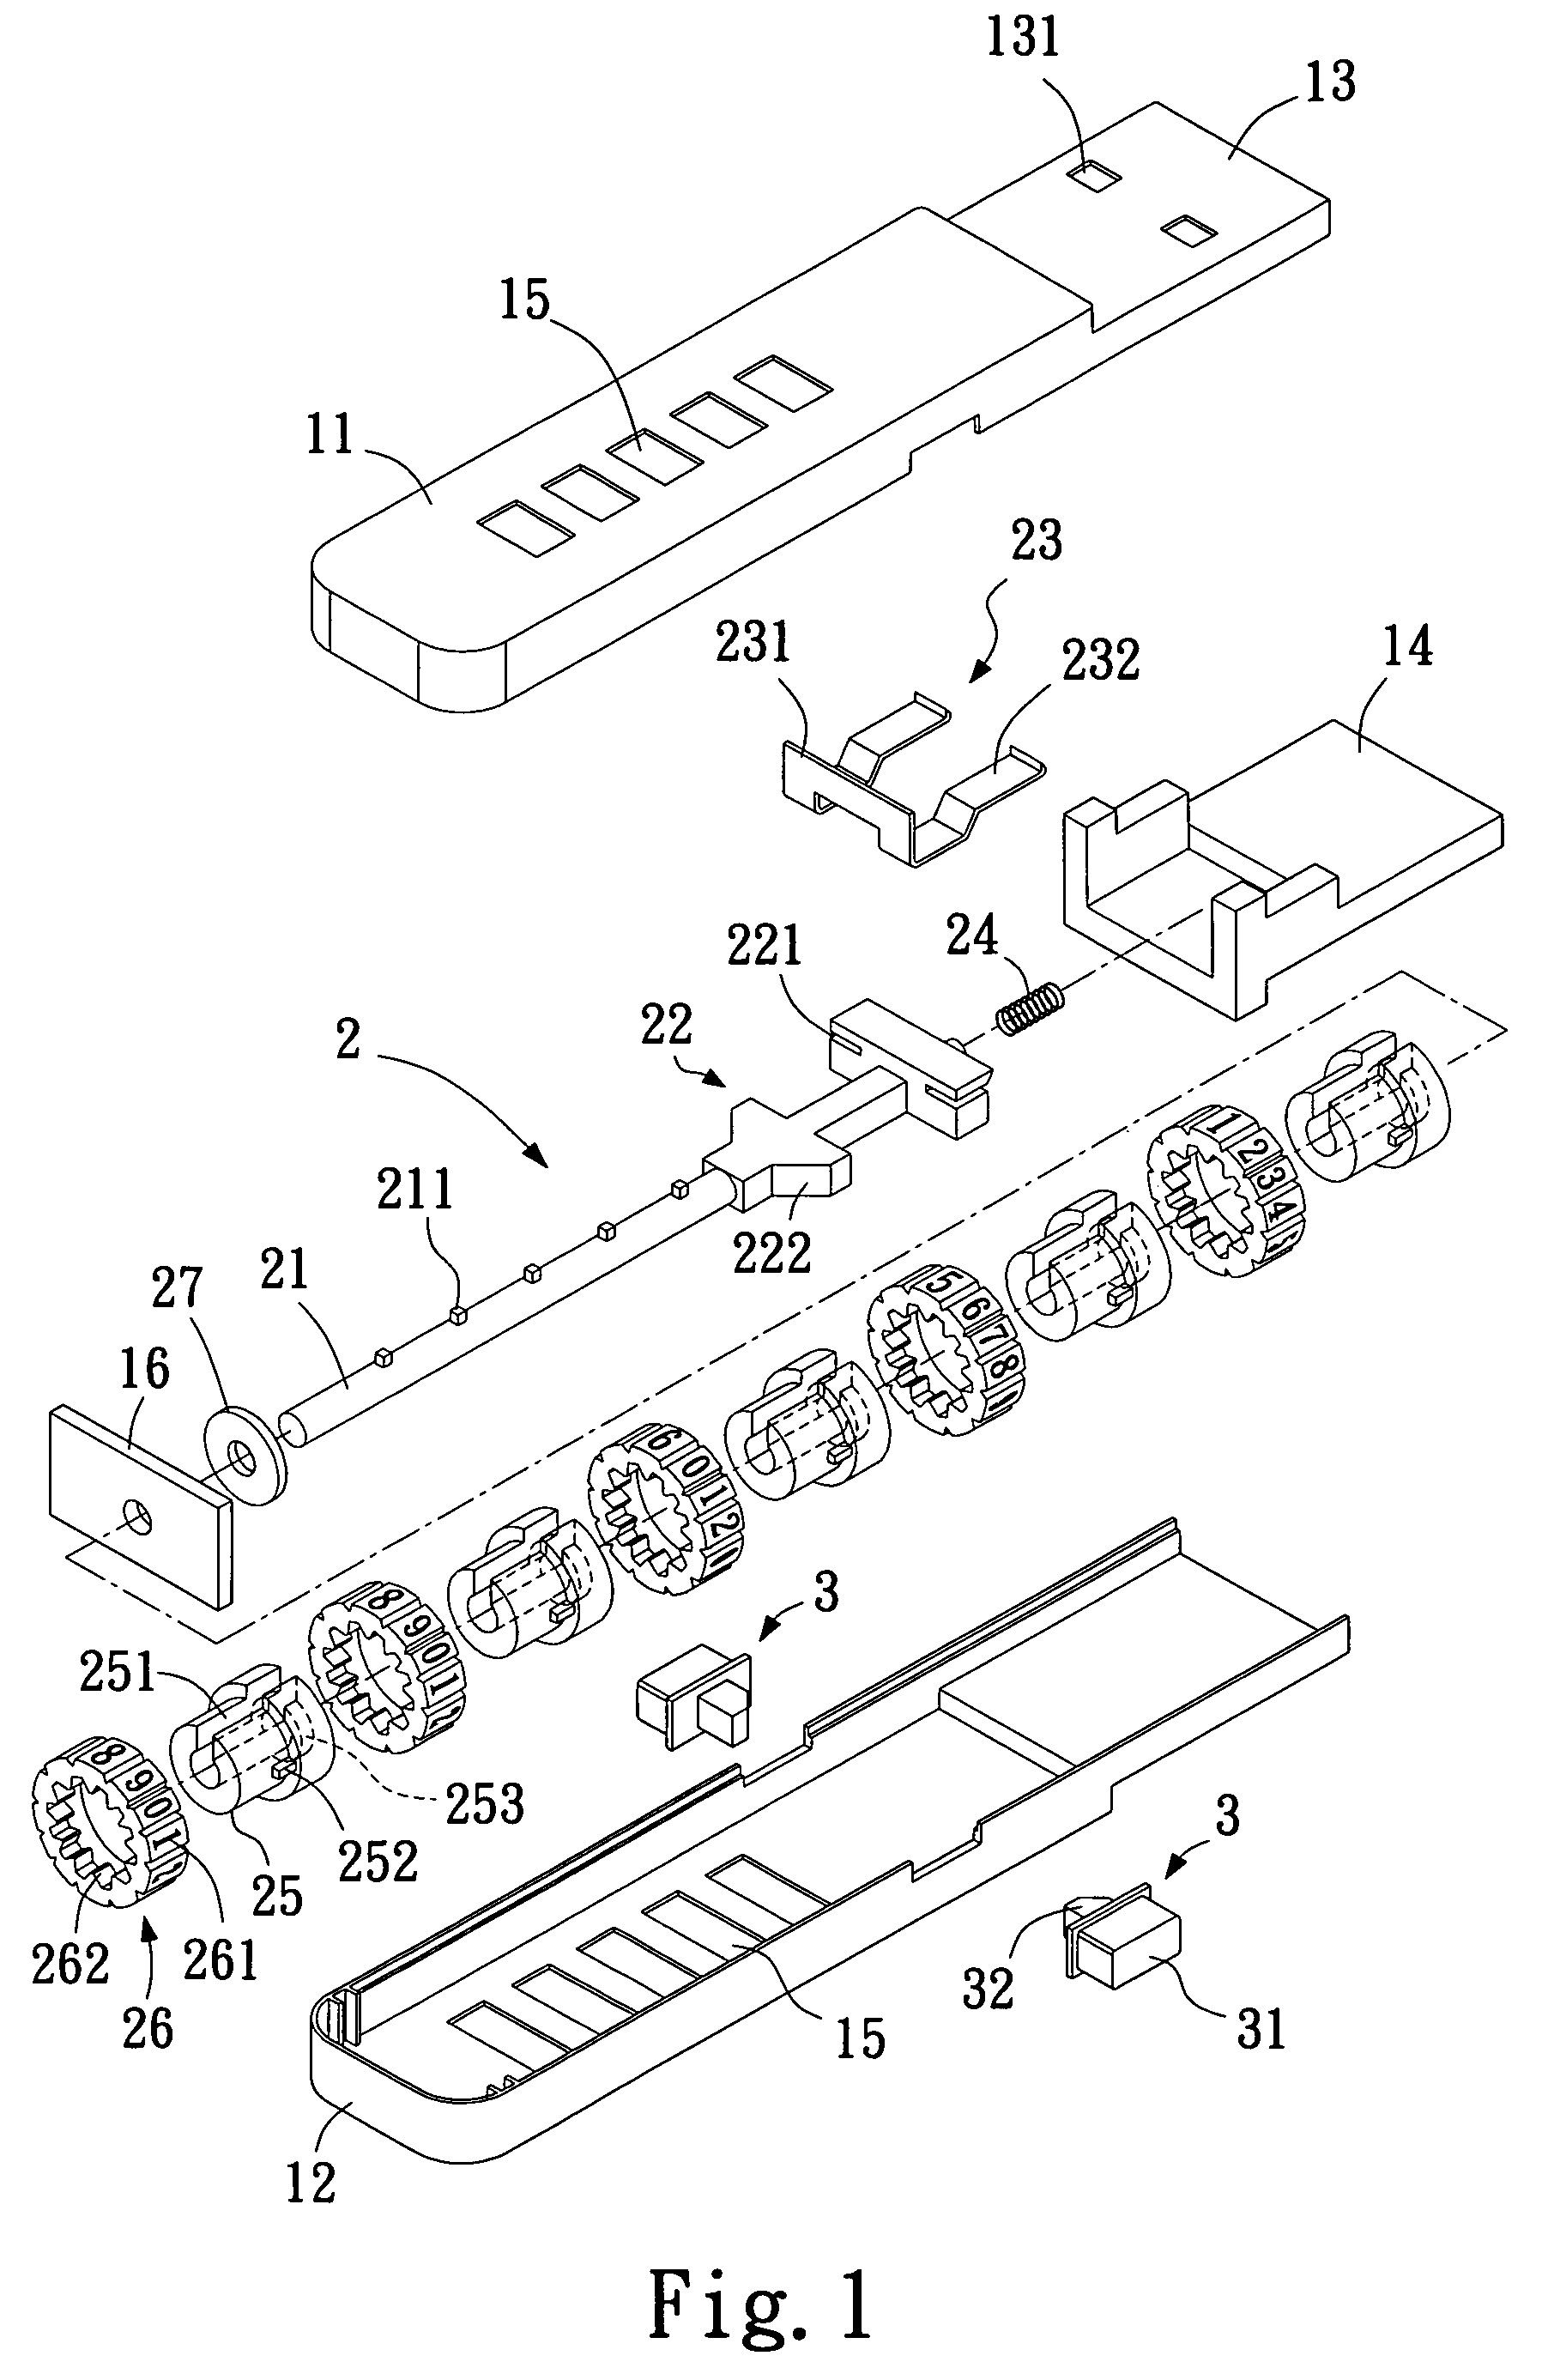 Locking device with changeable combination of numerals for locking a connecting port on a computer